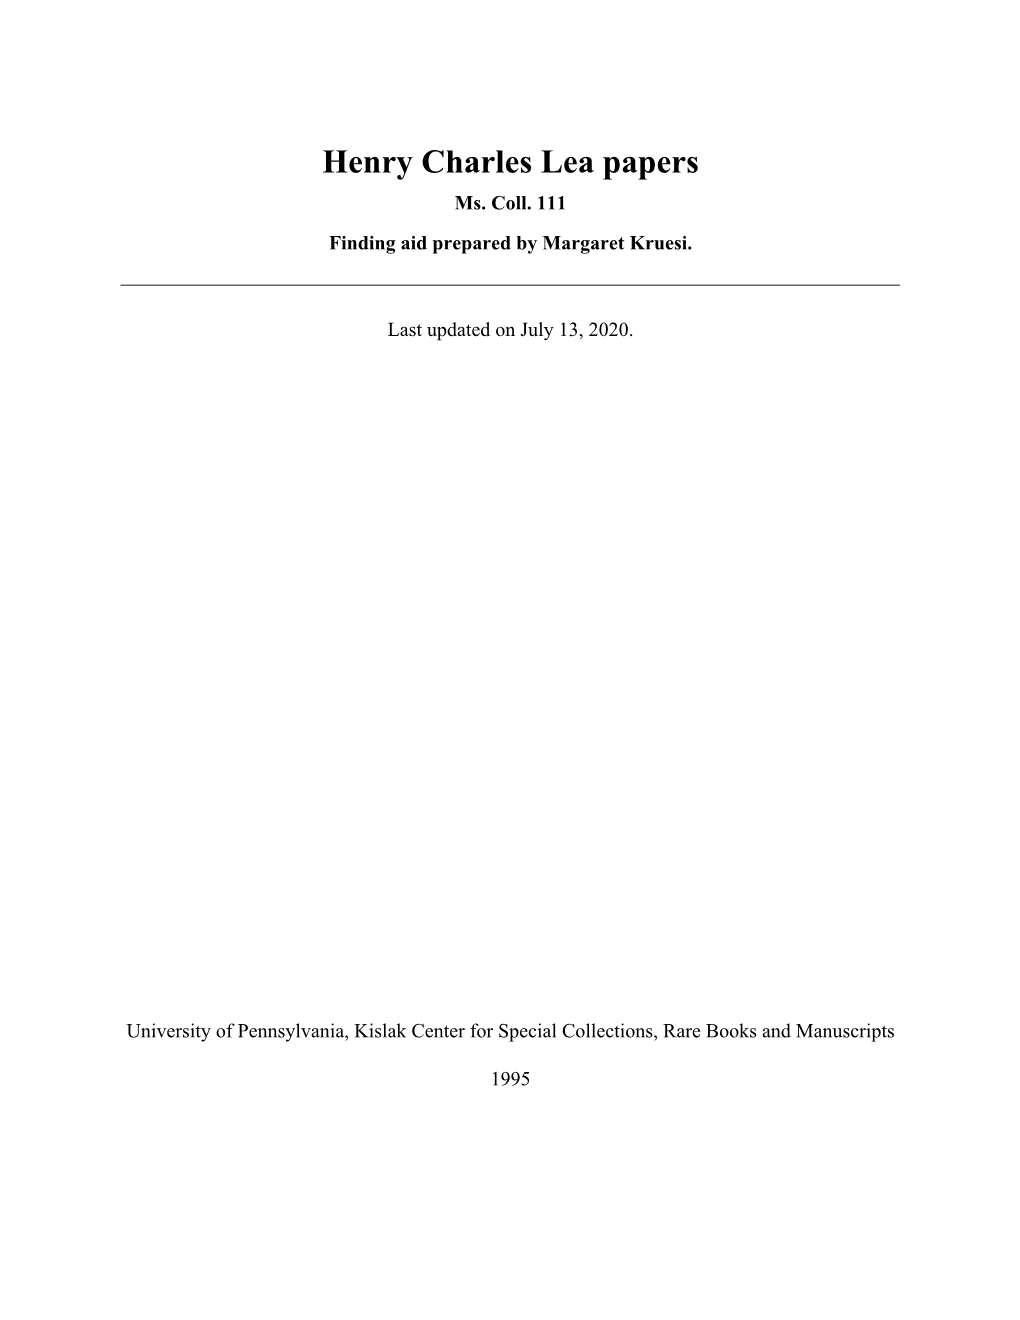 Henry Charles Lea Papers Ms